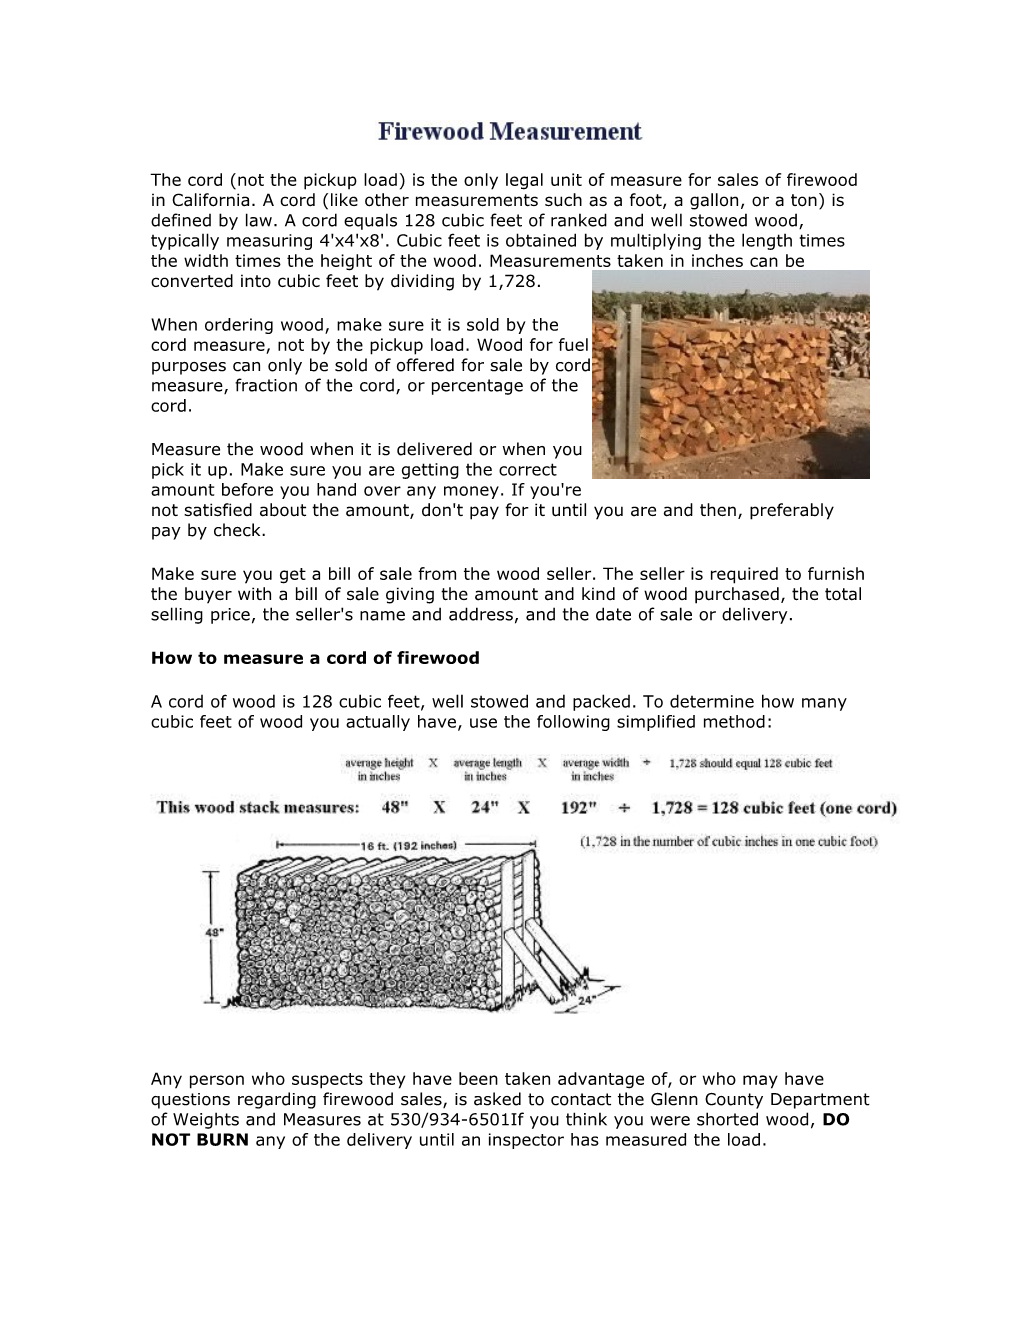 How to Measure a Cord of Firewood